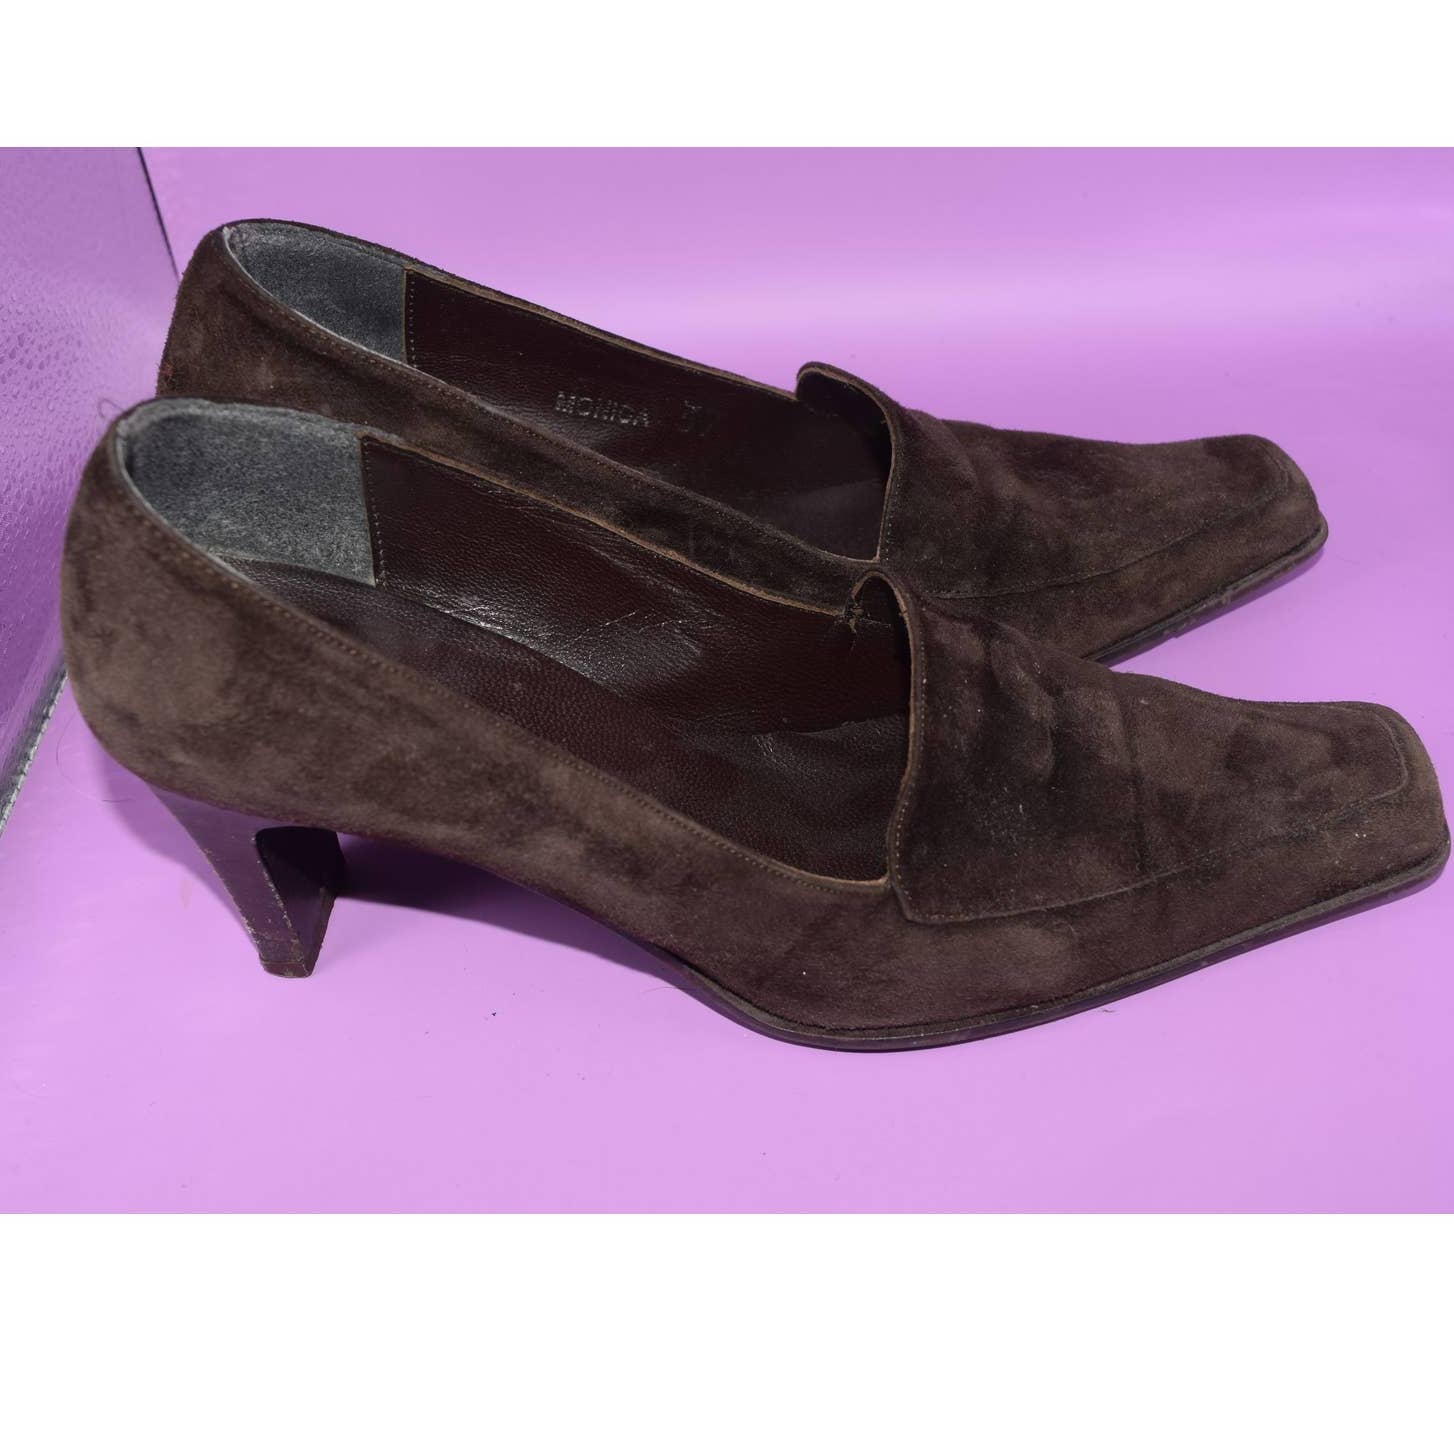 Vintage Kenneth Cole New York Monica Brown Suede Square Toe - 37 / 6.5